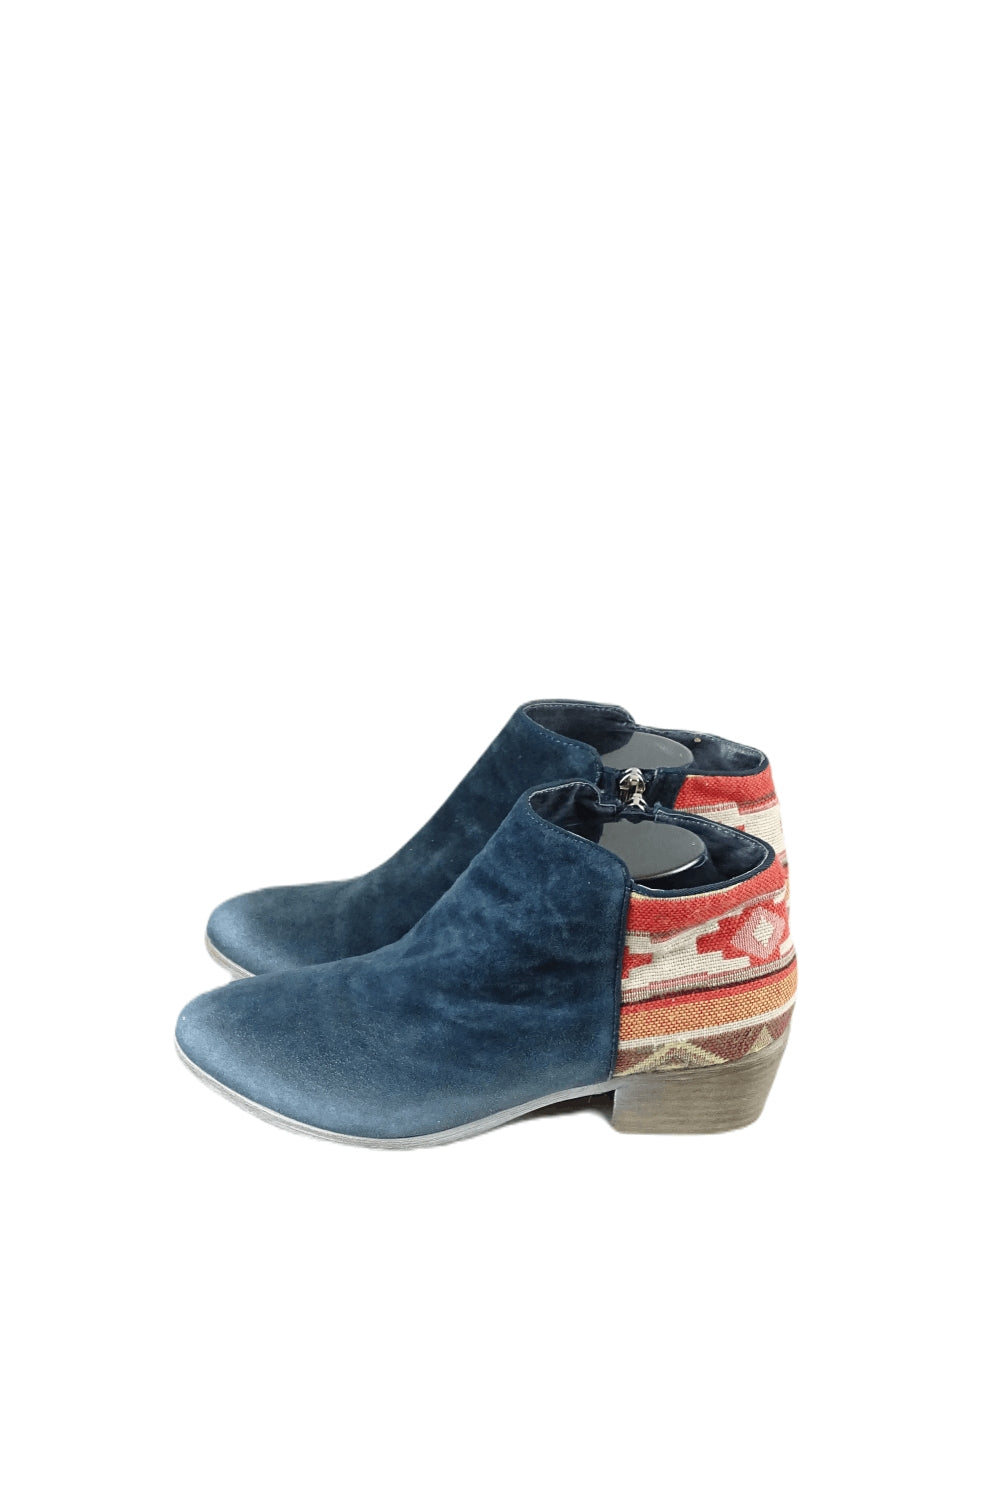 Mollini Blue Shoes With Fabric Pattern 38